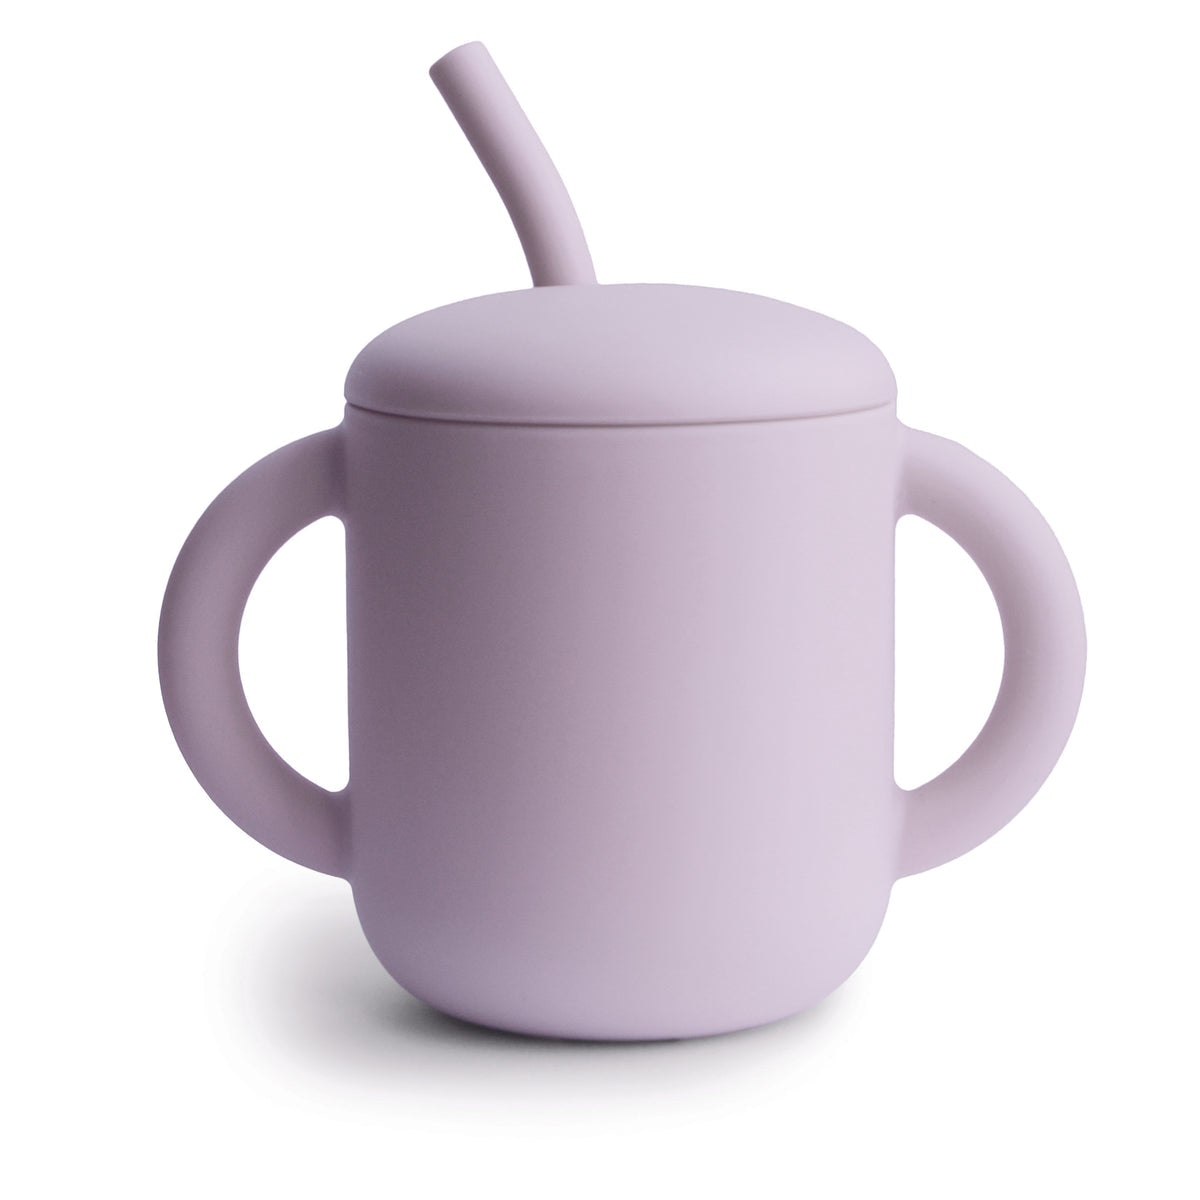 Silicone Training Cup + Straw 180 BABY GEAR Mushie Soft Lilac 